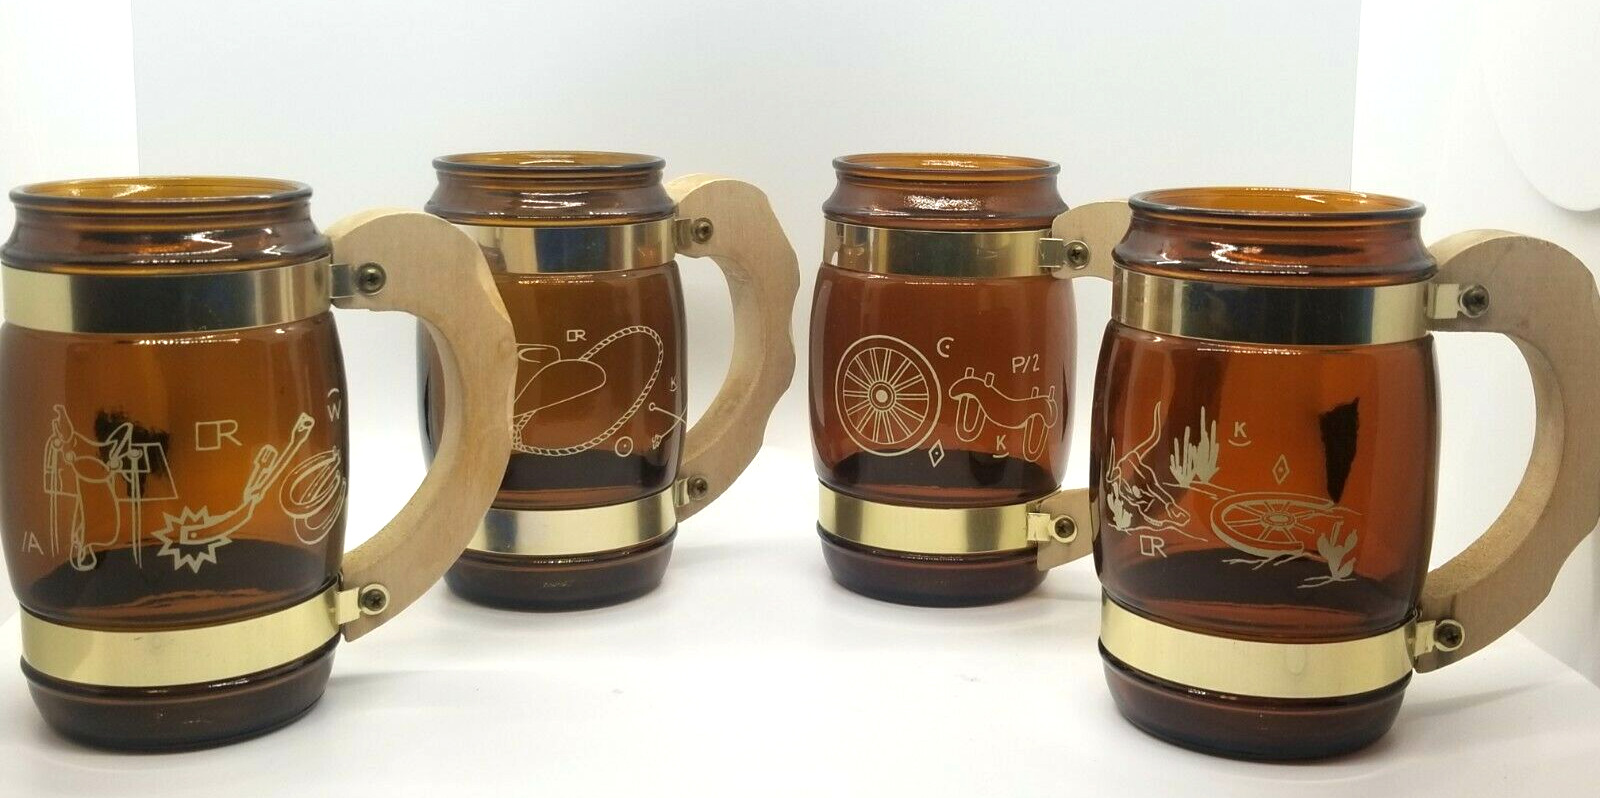 Vtg, Siesta Ware Glass Mugs, Country Style with Wooden Handles, Set of 4 Rare